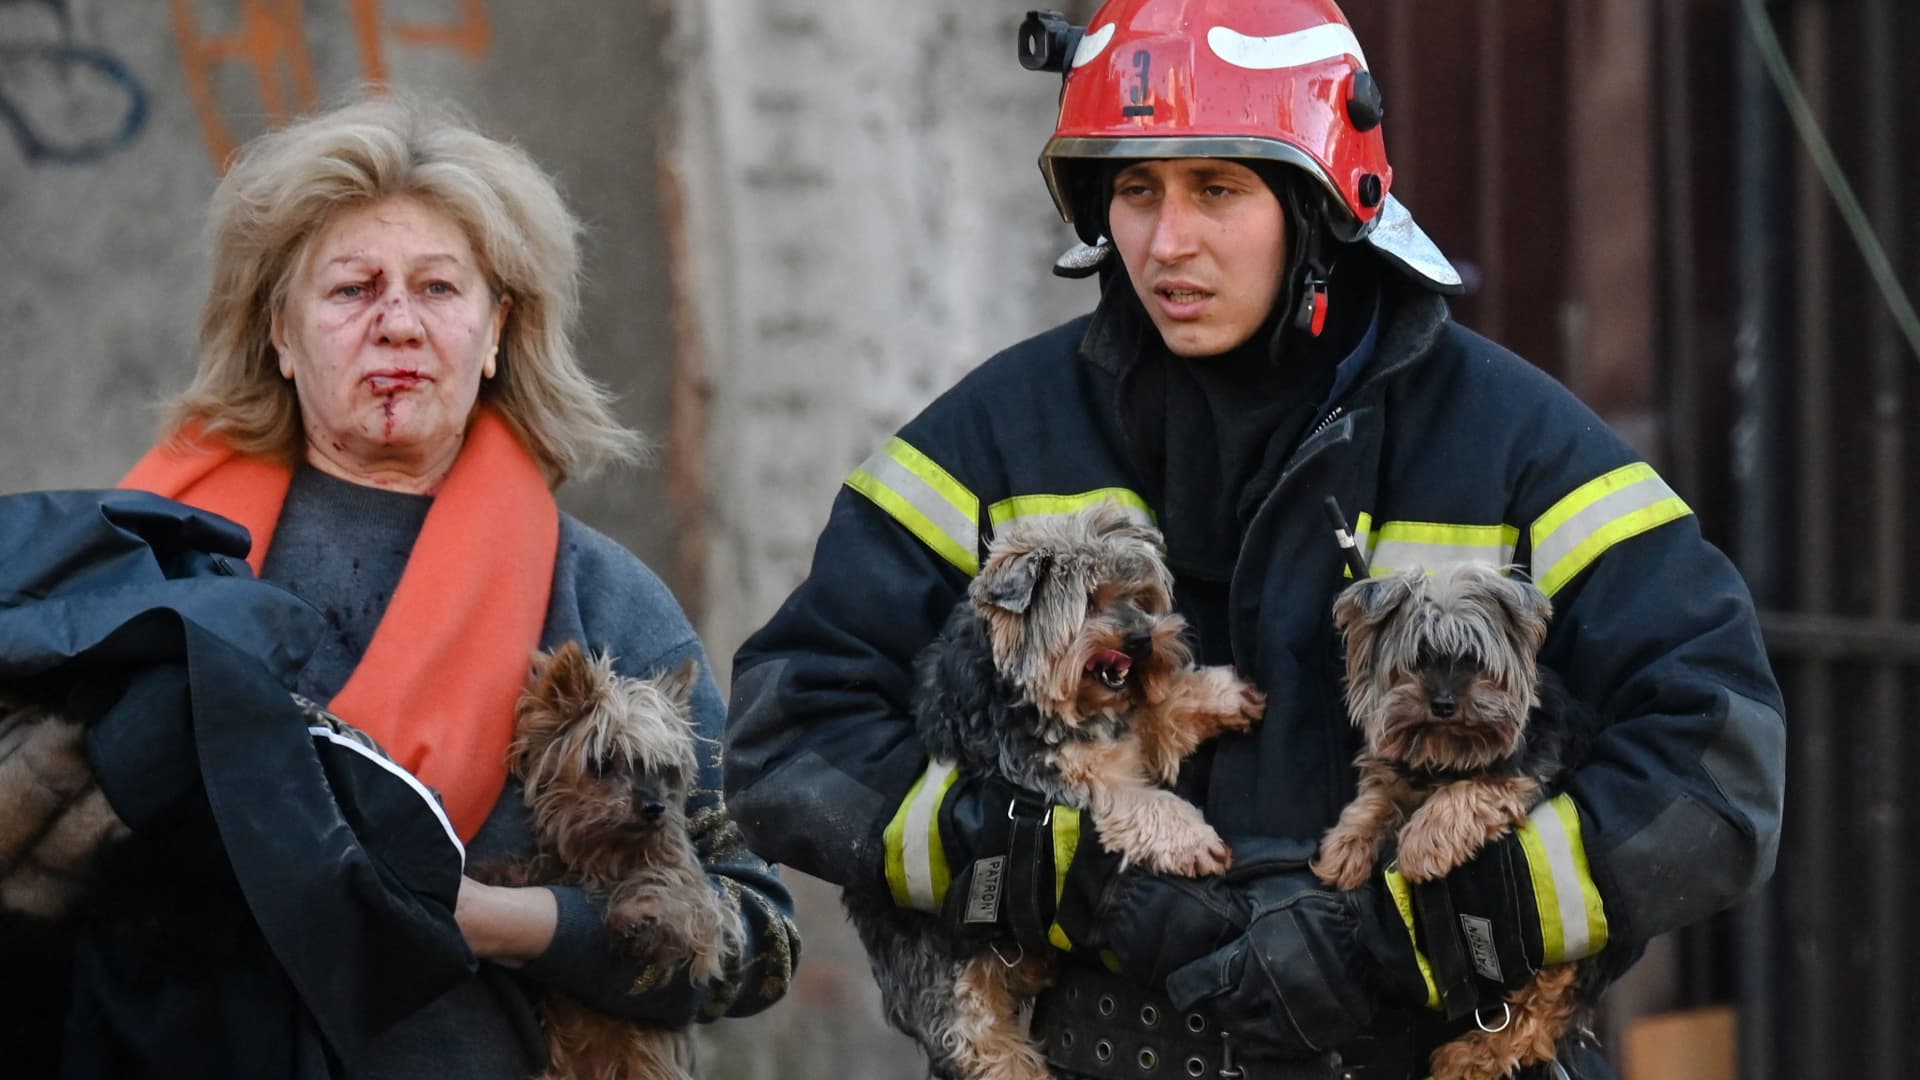 An emergency worker carries dogs as he escorts a local resident outside a partially destroyed multi-story office building after several Russian strikes hit the Ukrainian capital of Kyiv on Oct. 10, 2022.